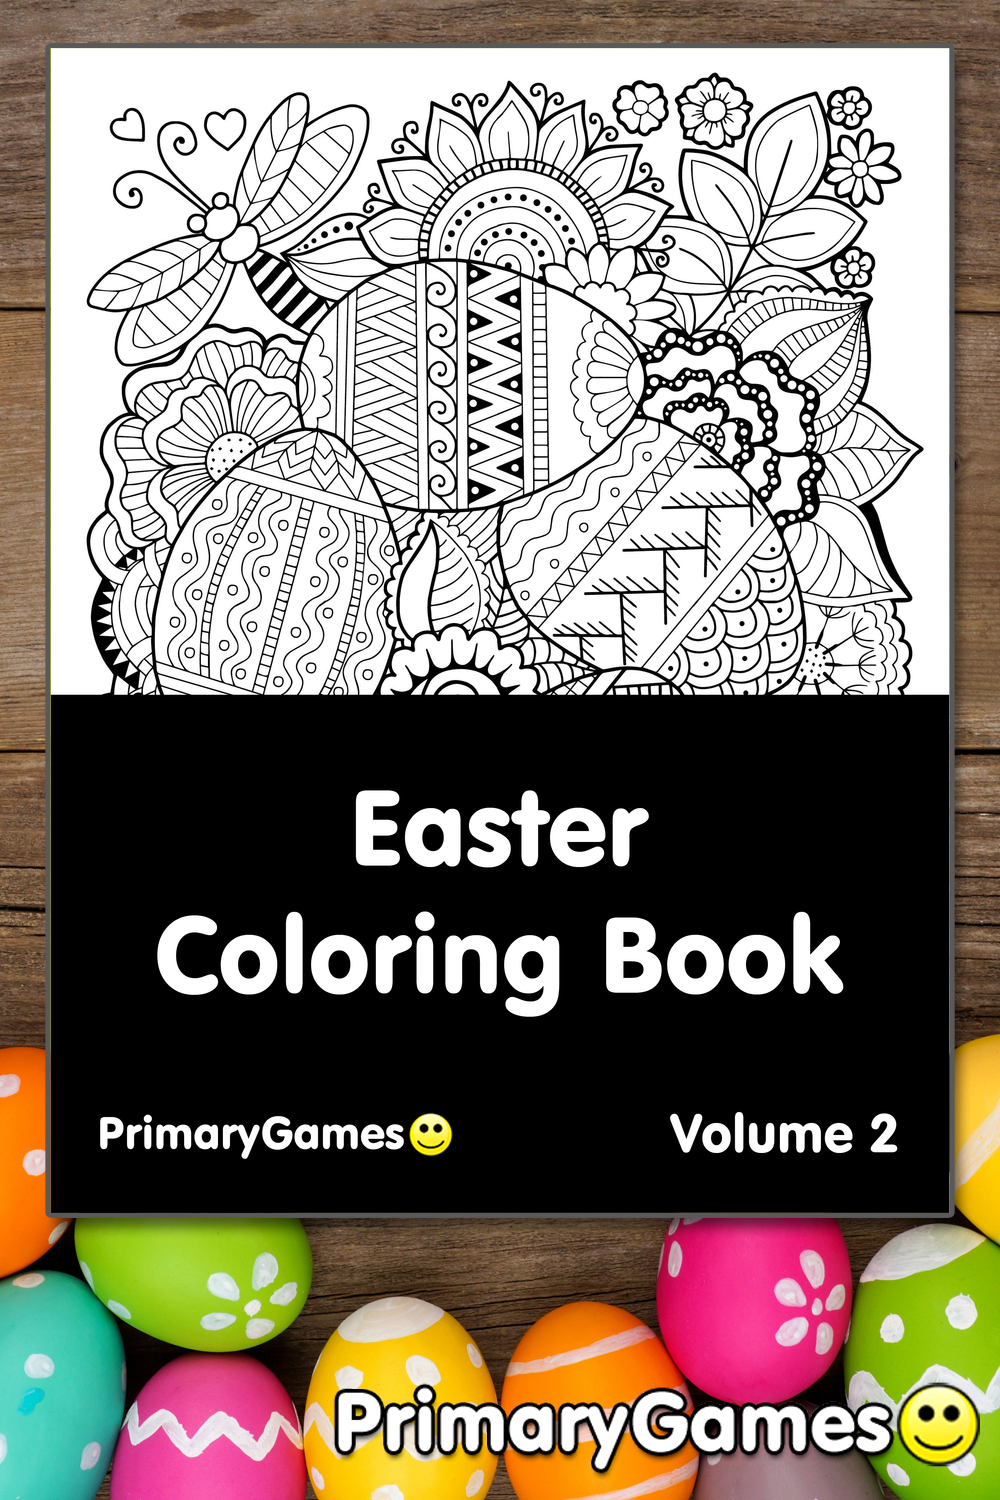 Easter Coloring eBook: Volume 2 • FREE Printable PDF from PrimaryGames